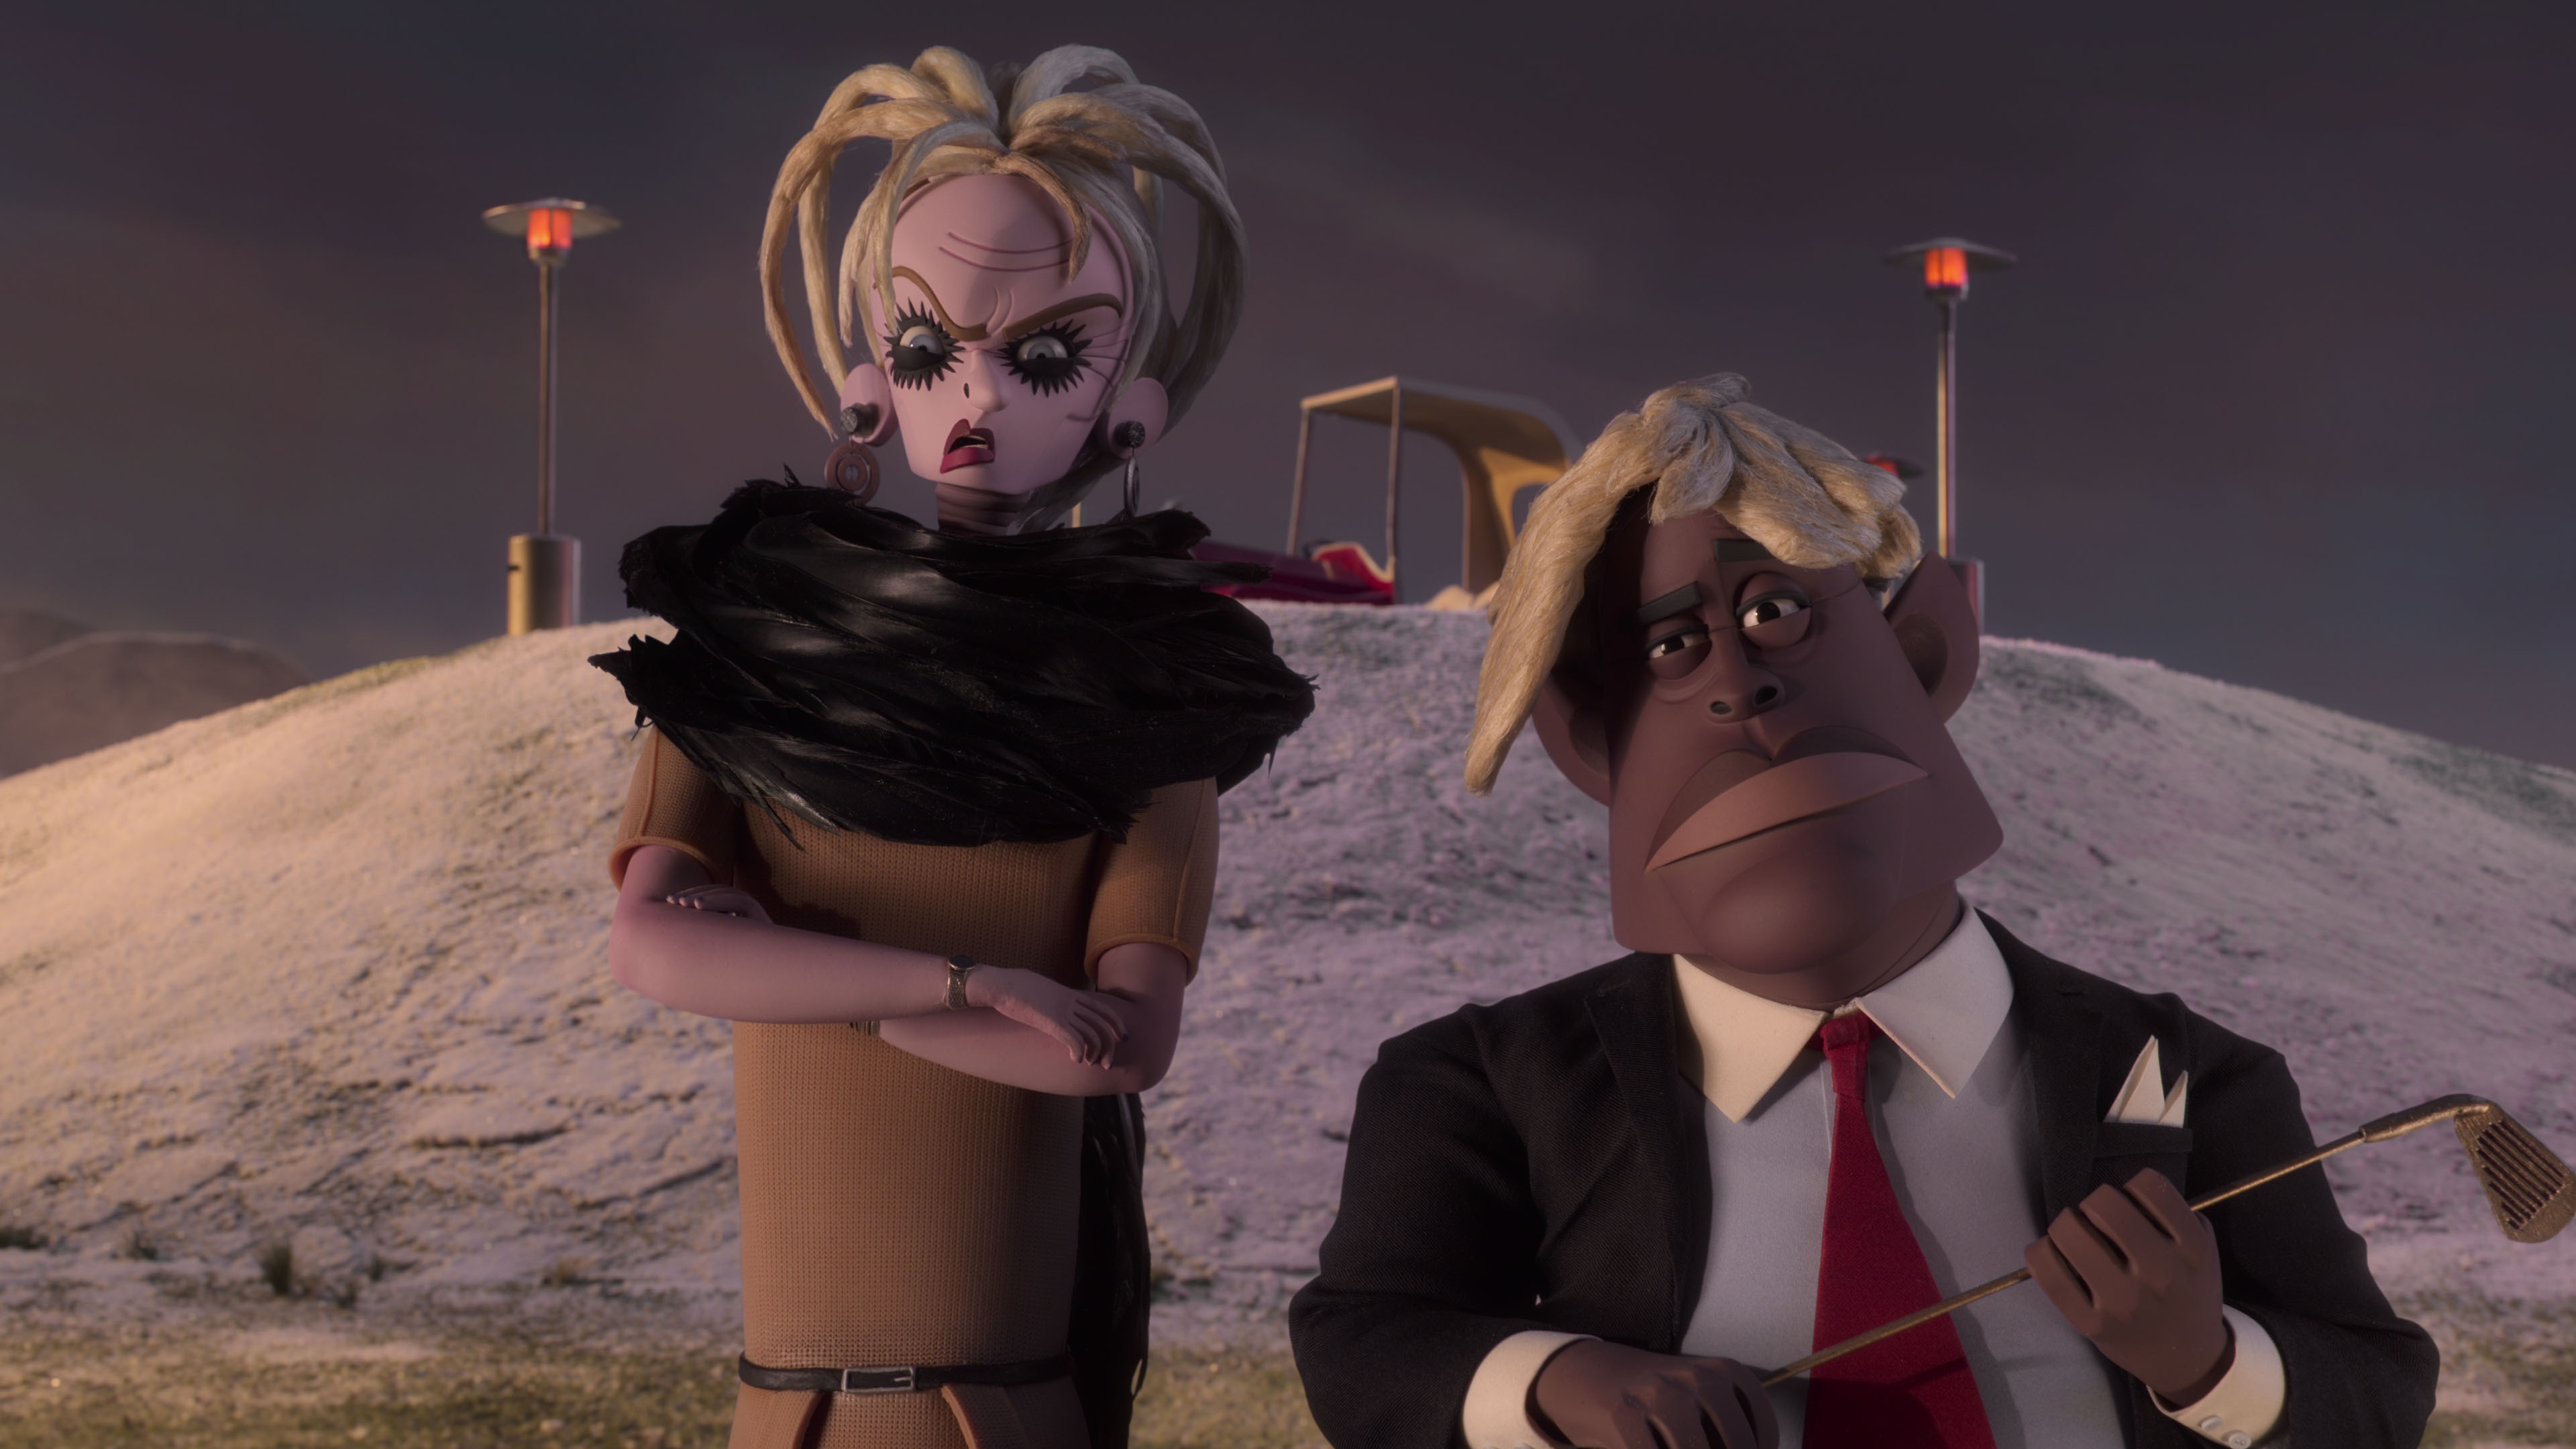 Production still from ‘Wendell and Wild’. (L-R) Irmgard Klaxon (voiced by Maxine Peake) and Lane Klaxon (voiced by David Harewood). Image: courtesy of Netflix